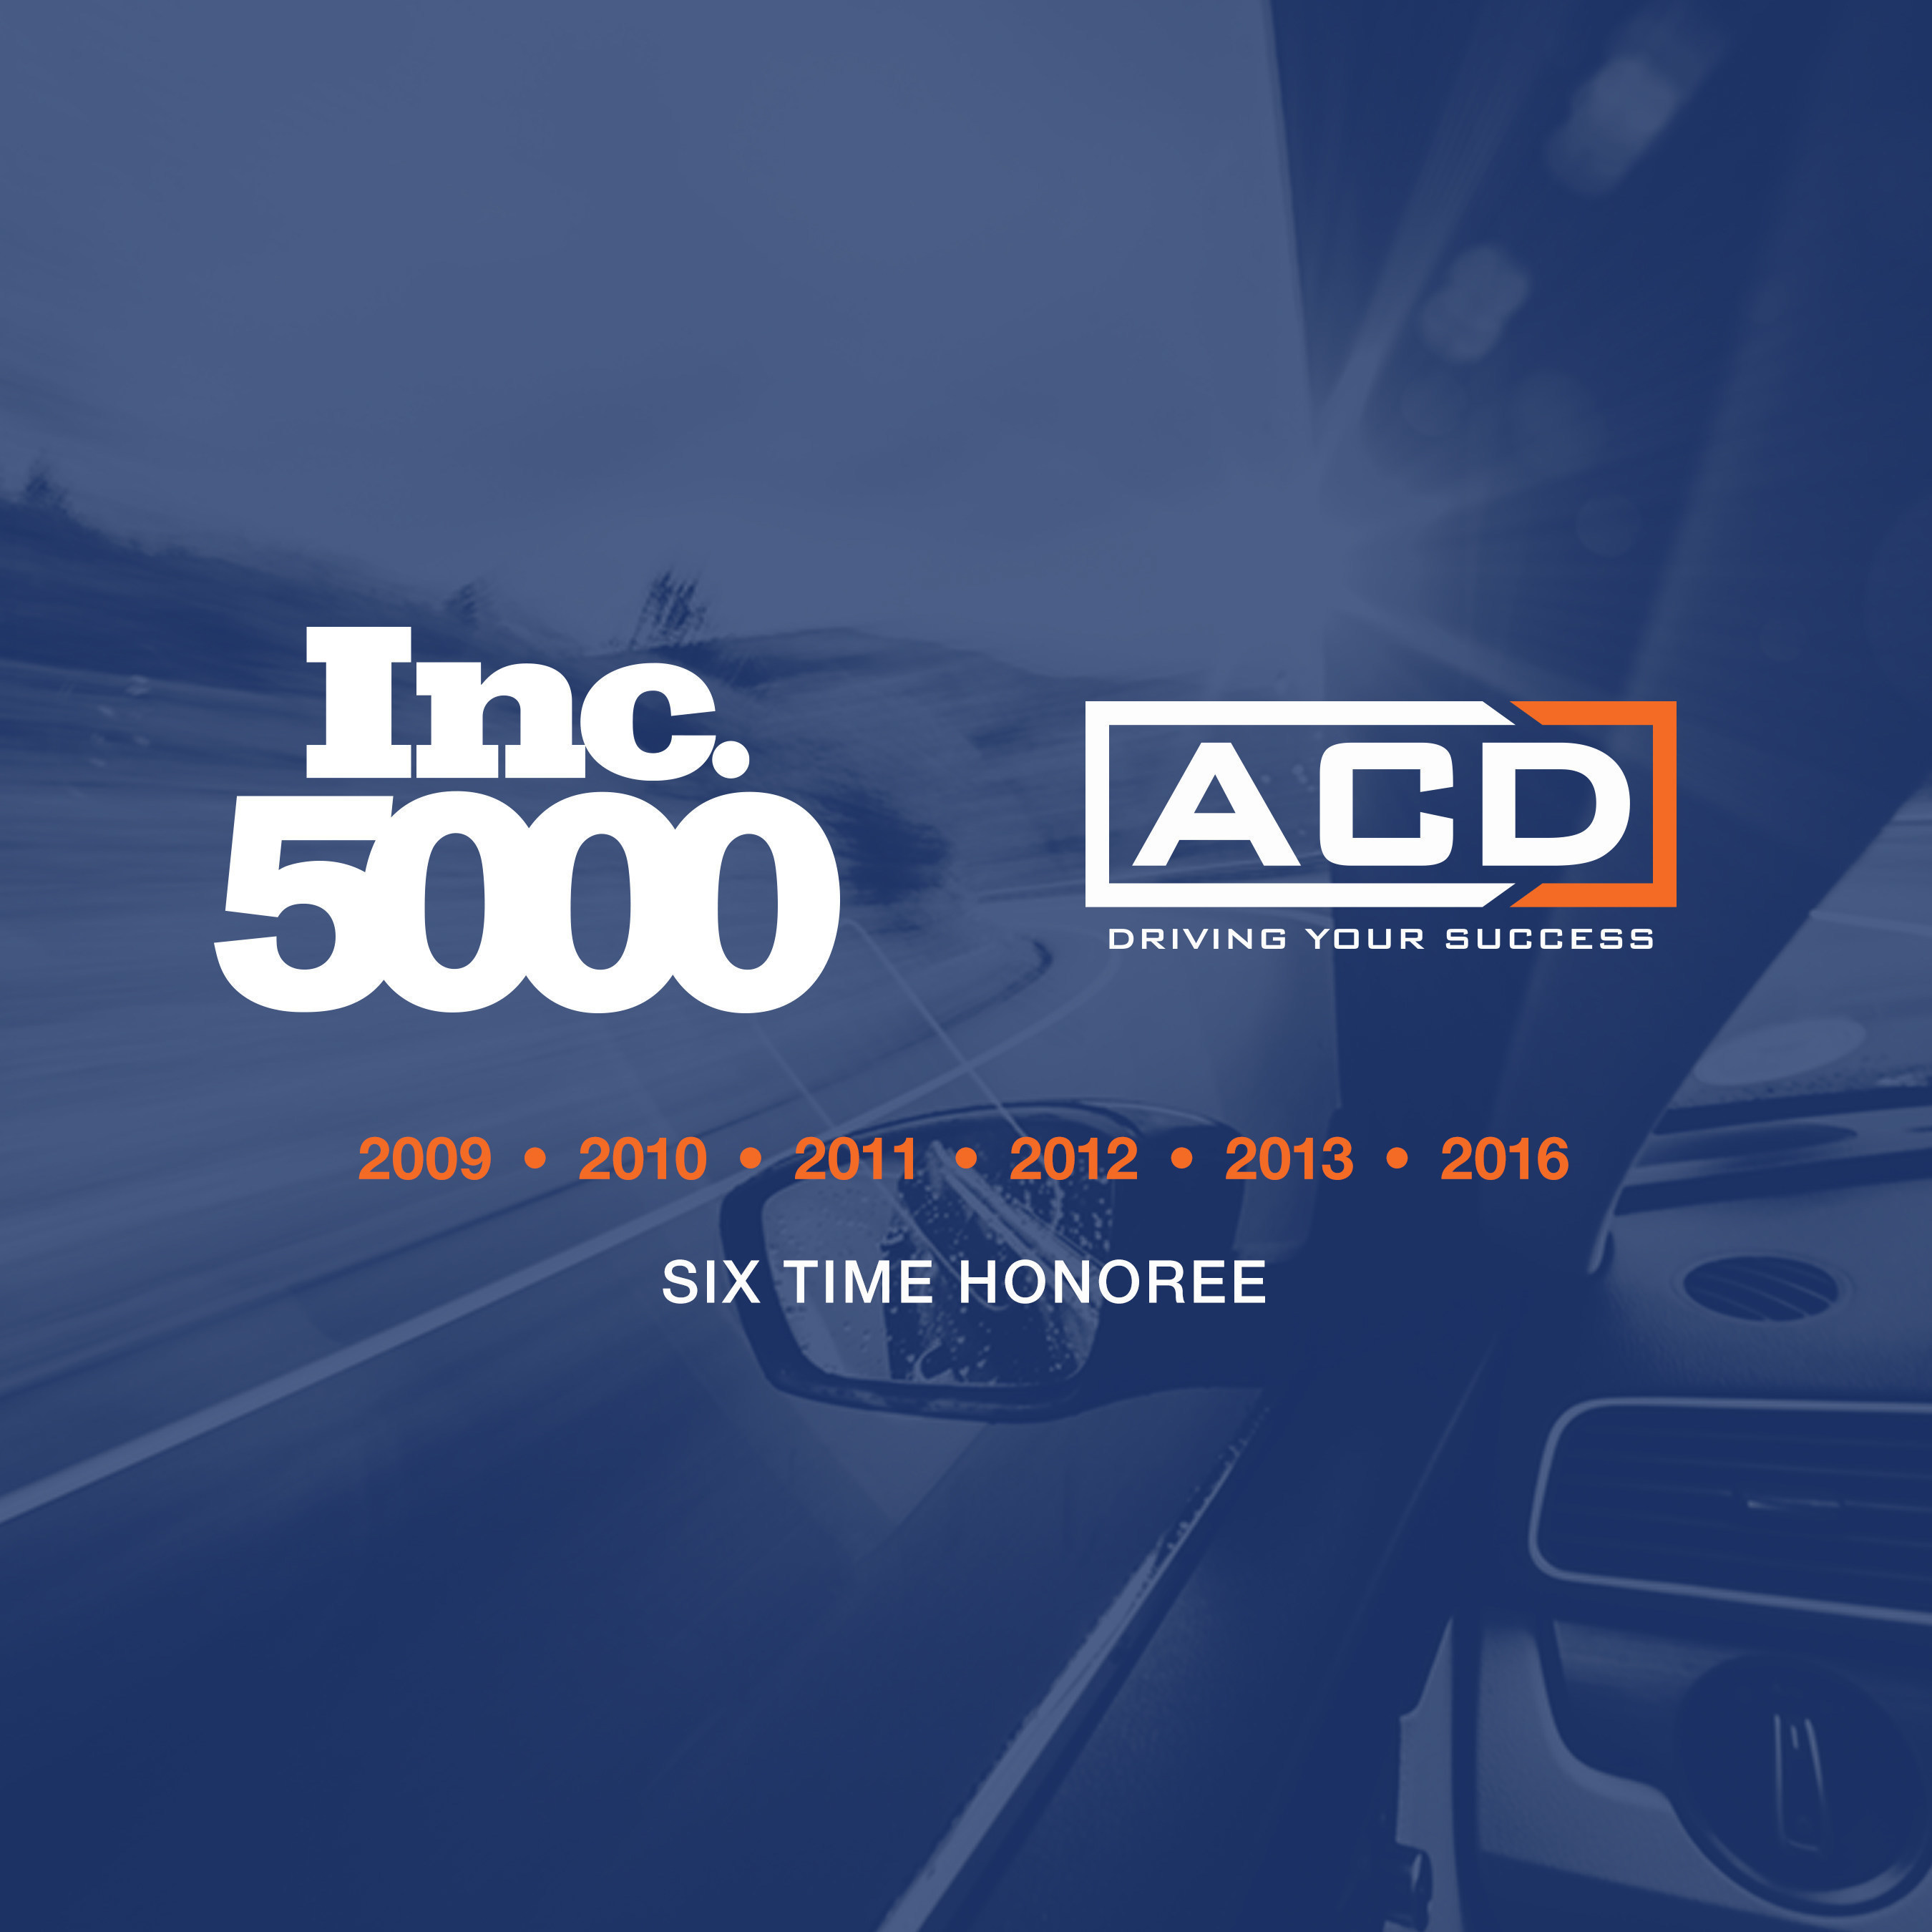 ACD Named Six Time Honoree